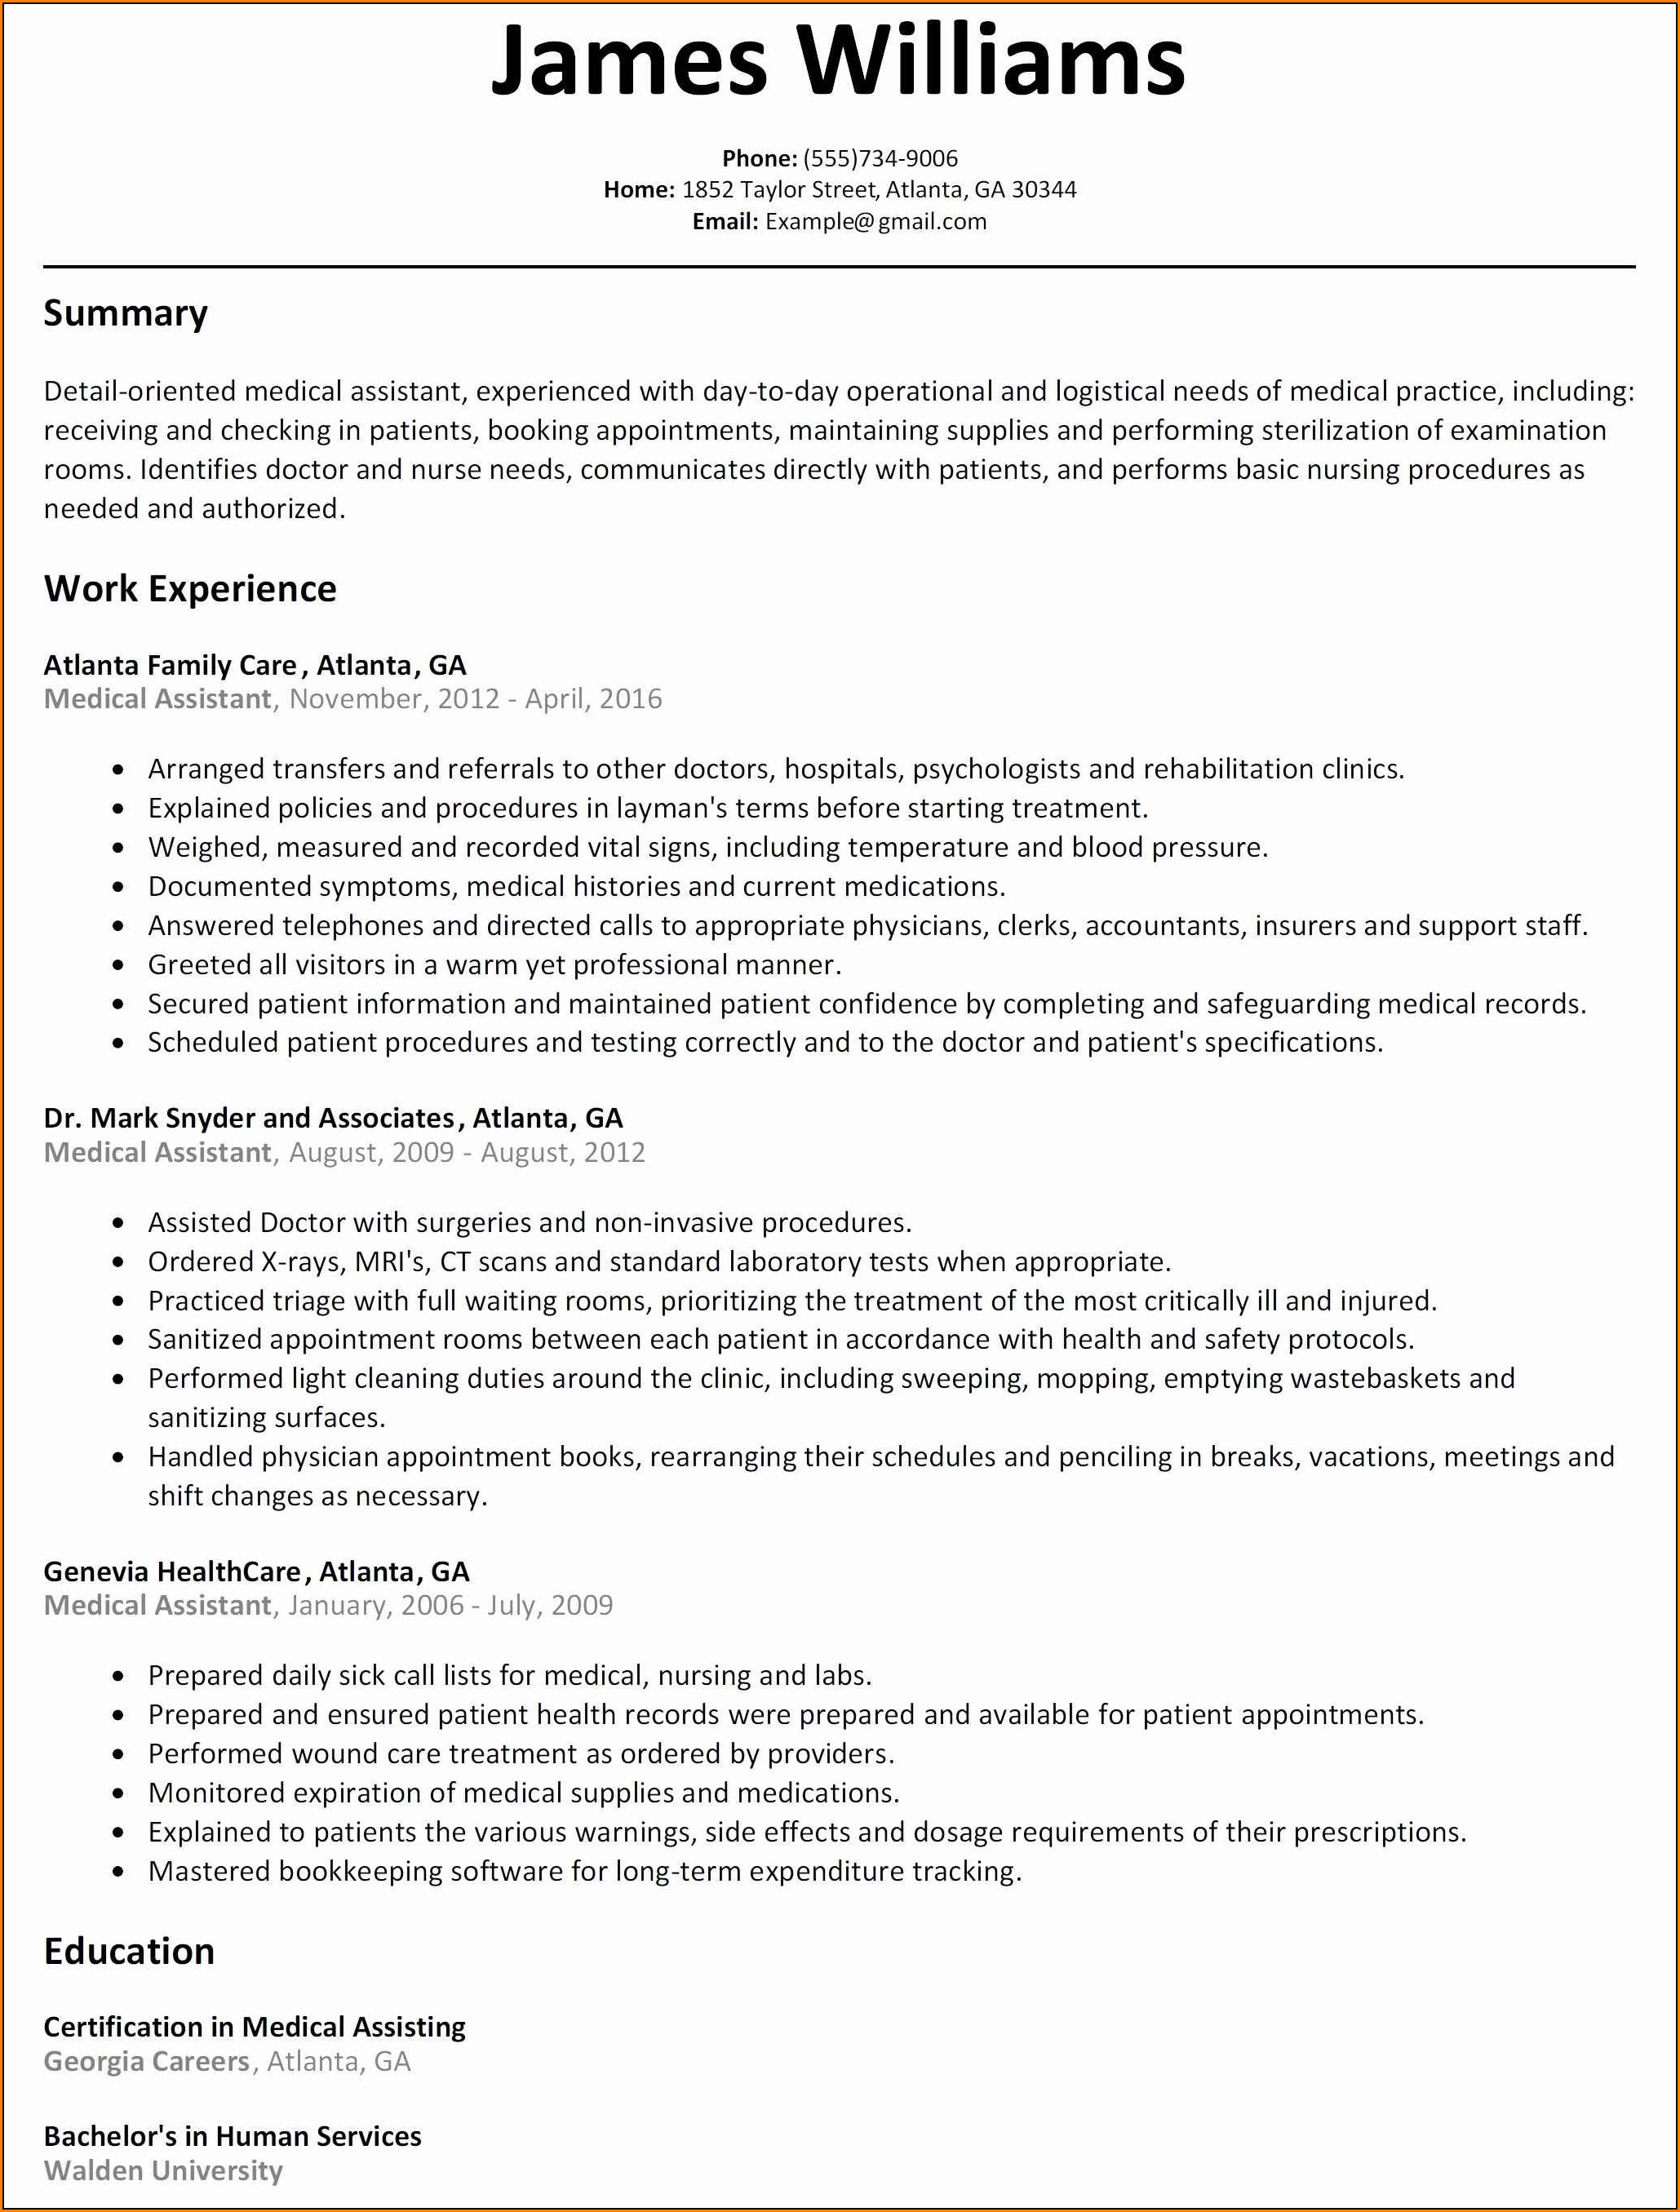 warehouse-manager-resume-template-free-resume-resume-examples